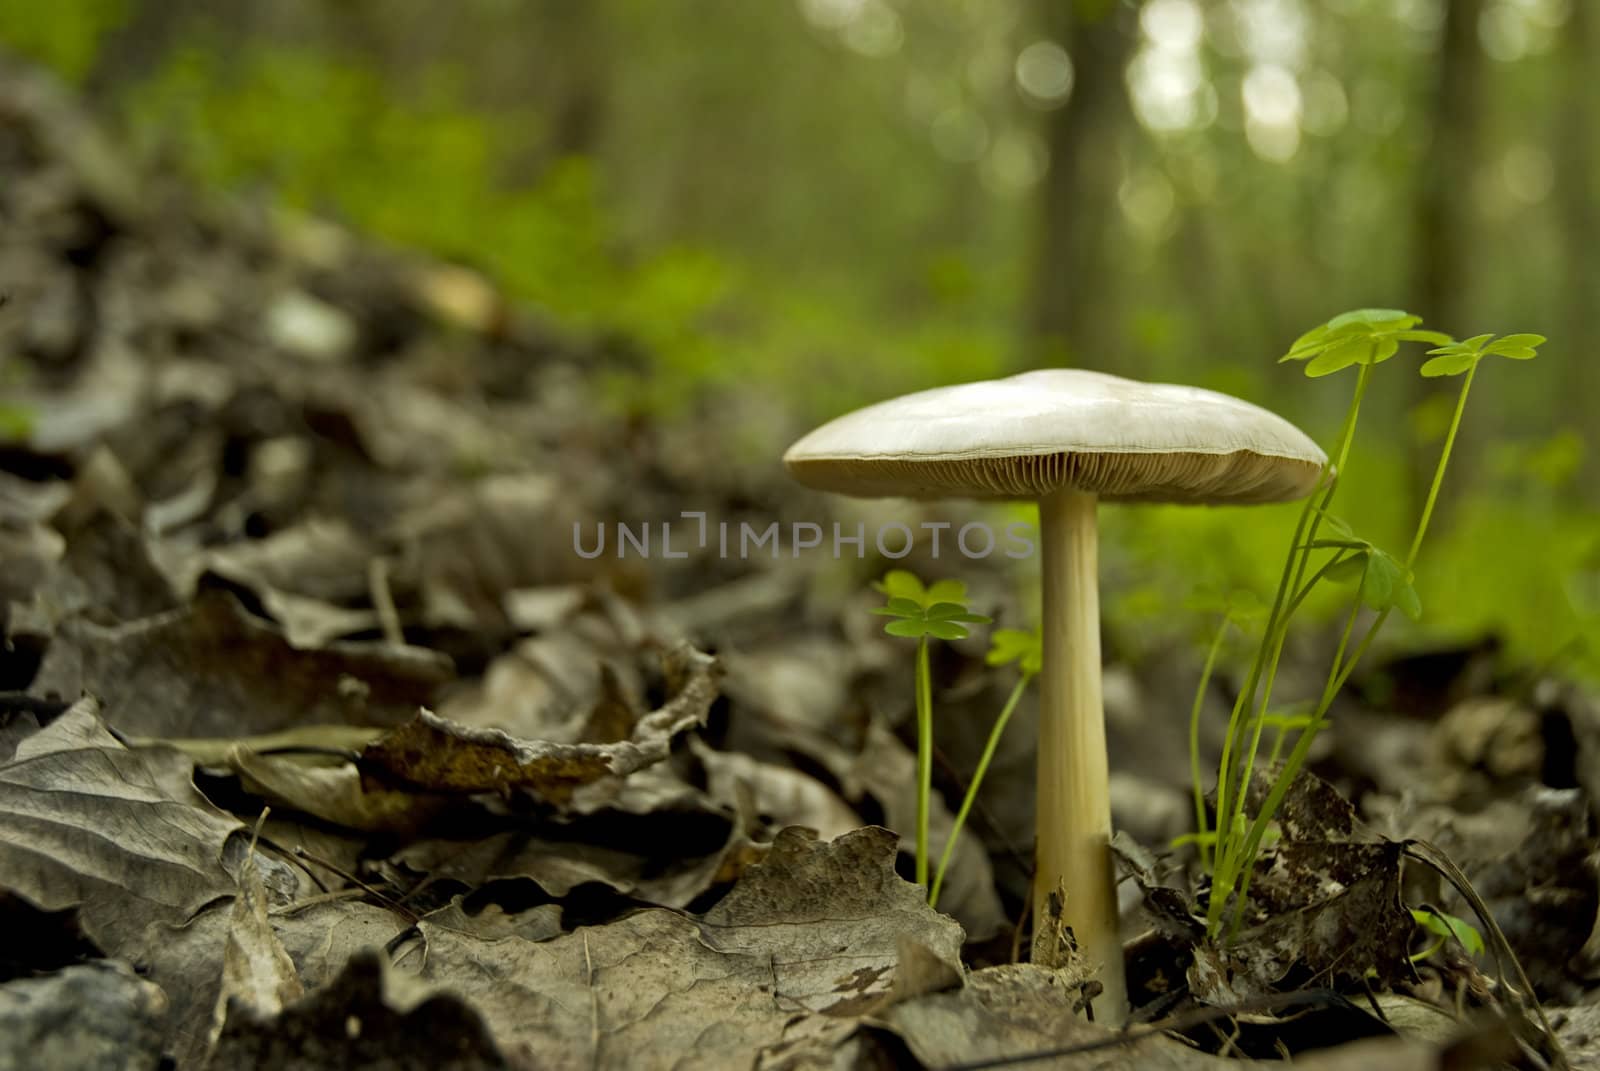 Wild mushroom growing in the woods with dead leaves scattered around it